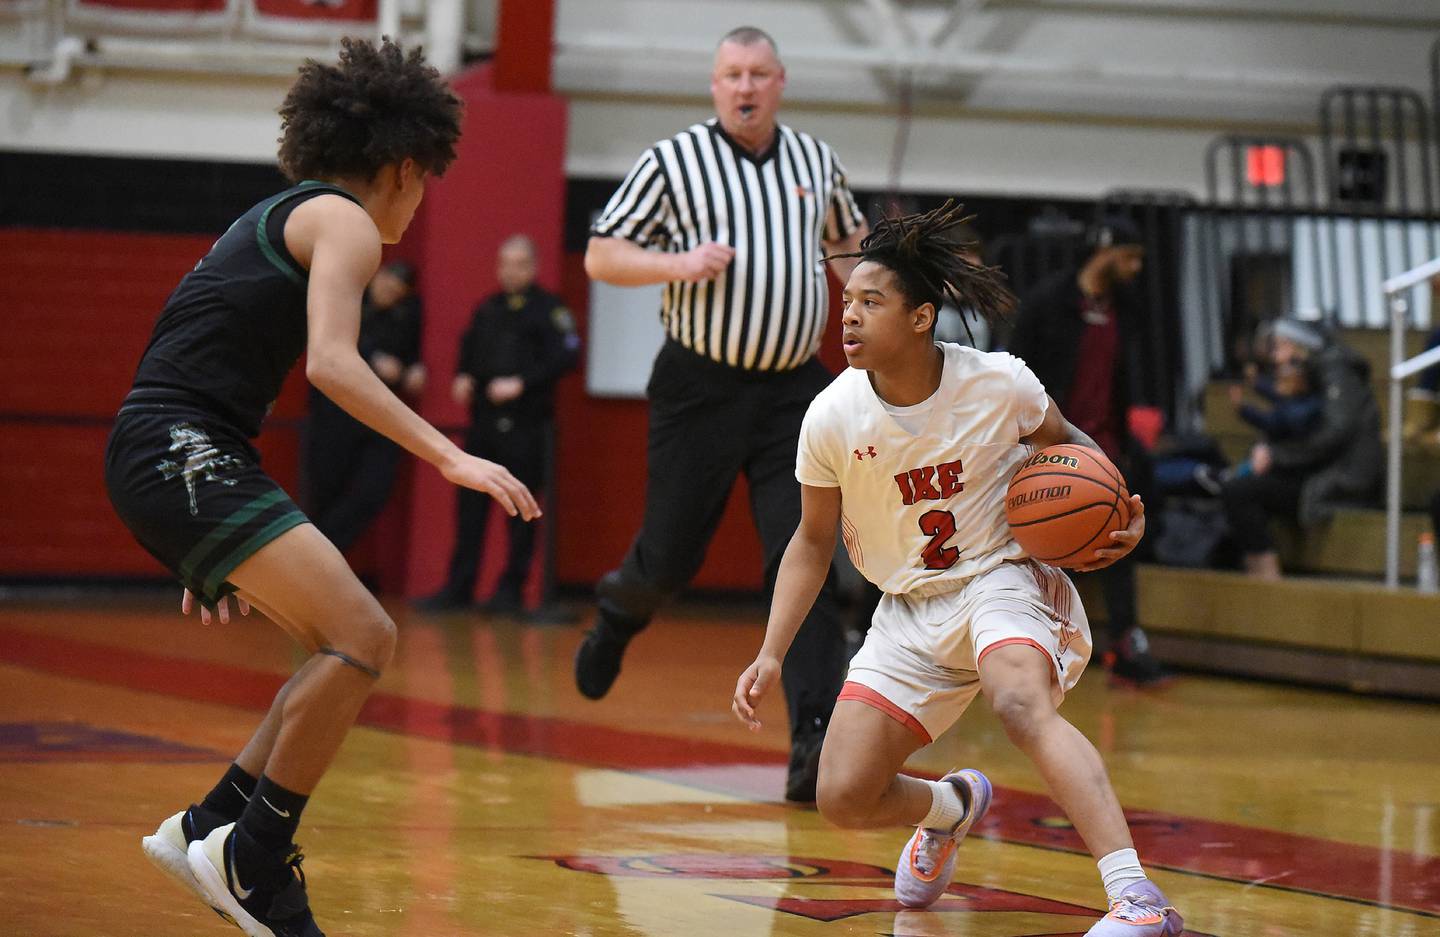 Eisenhower's AJ Abrams (2) brings the ball up the court against Evergreen Park during a South Suburban Red game in Blue Island on Tuesday, Dec. 13, 2022.